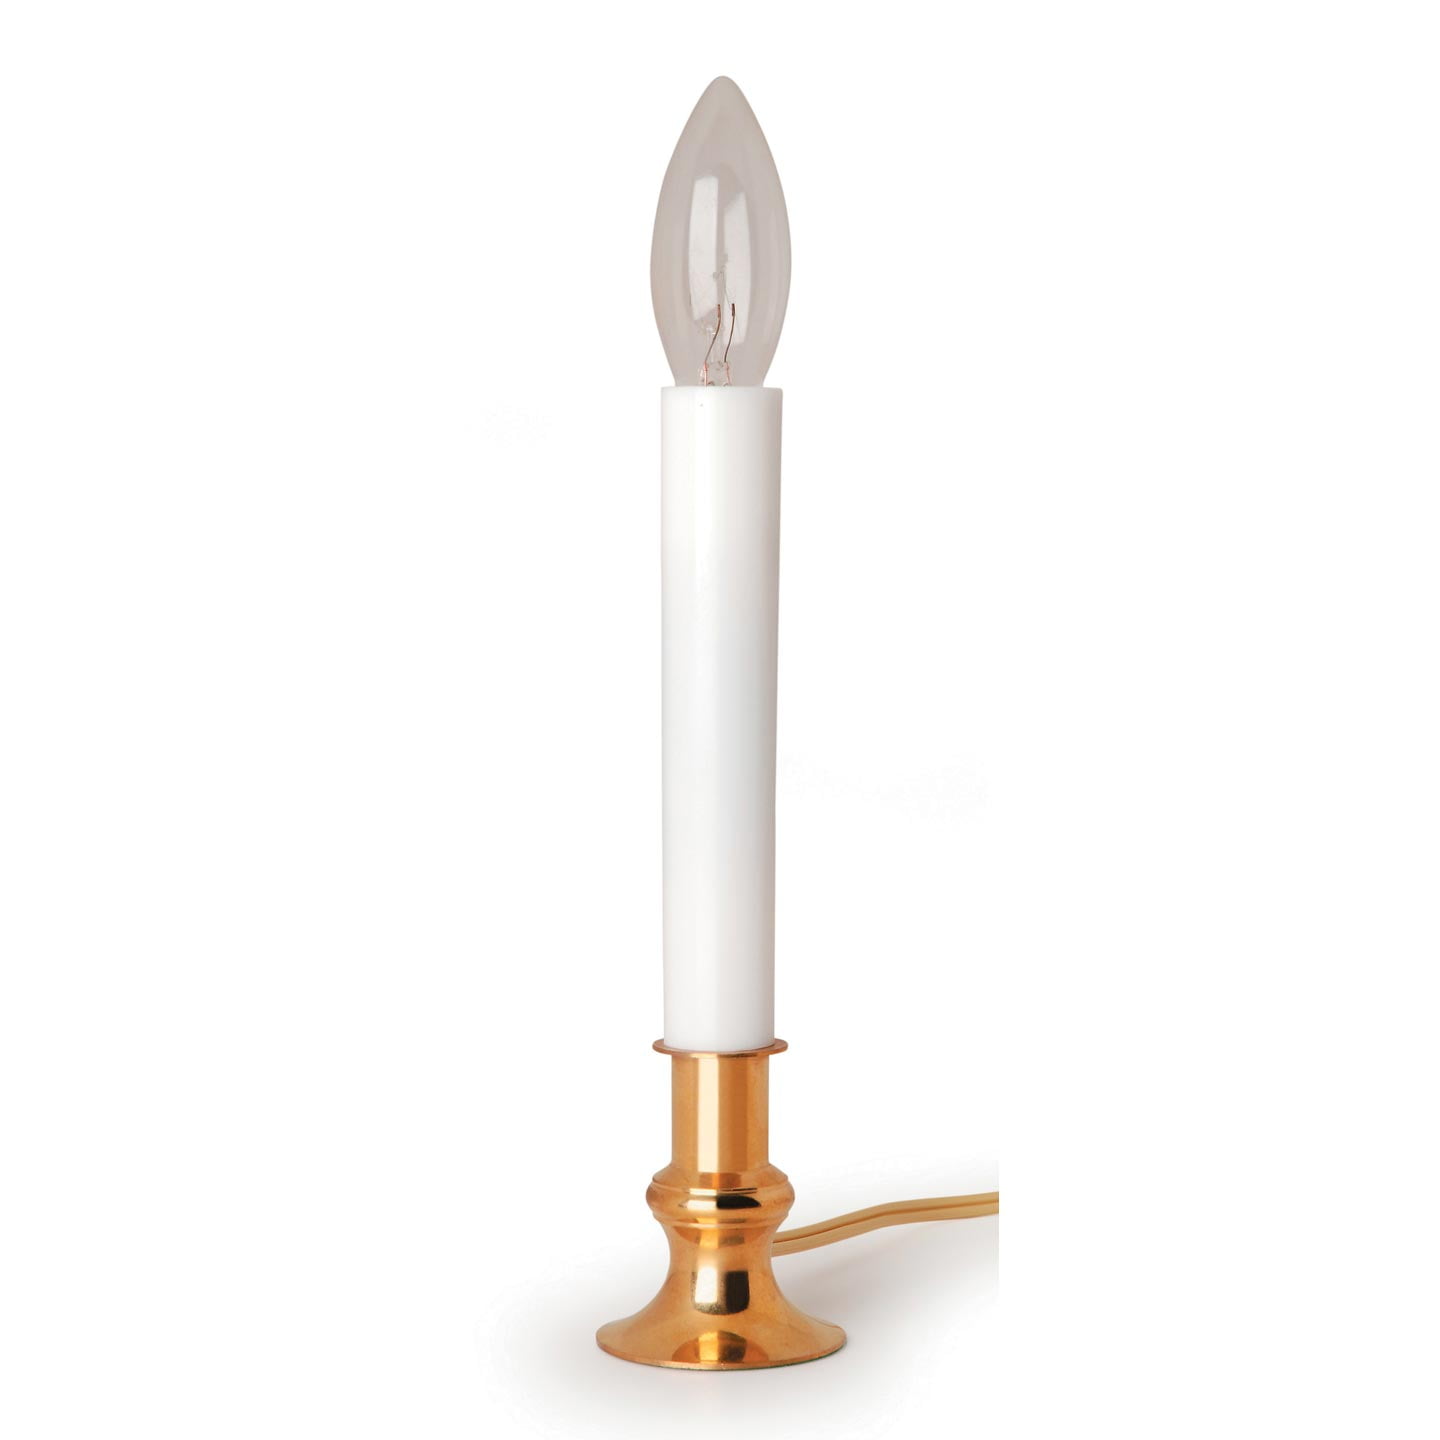 Darice 6205-54 Battery-Operated LED Pewter Base Candlesticks Candle Lamps with Remote 5 pieces SS-DAR-6205-54